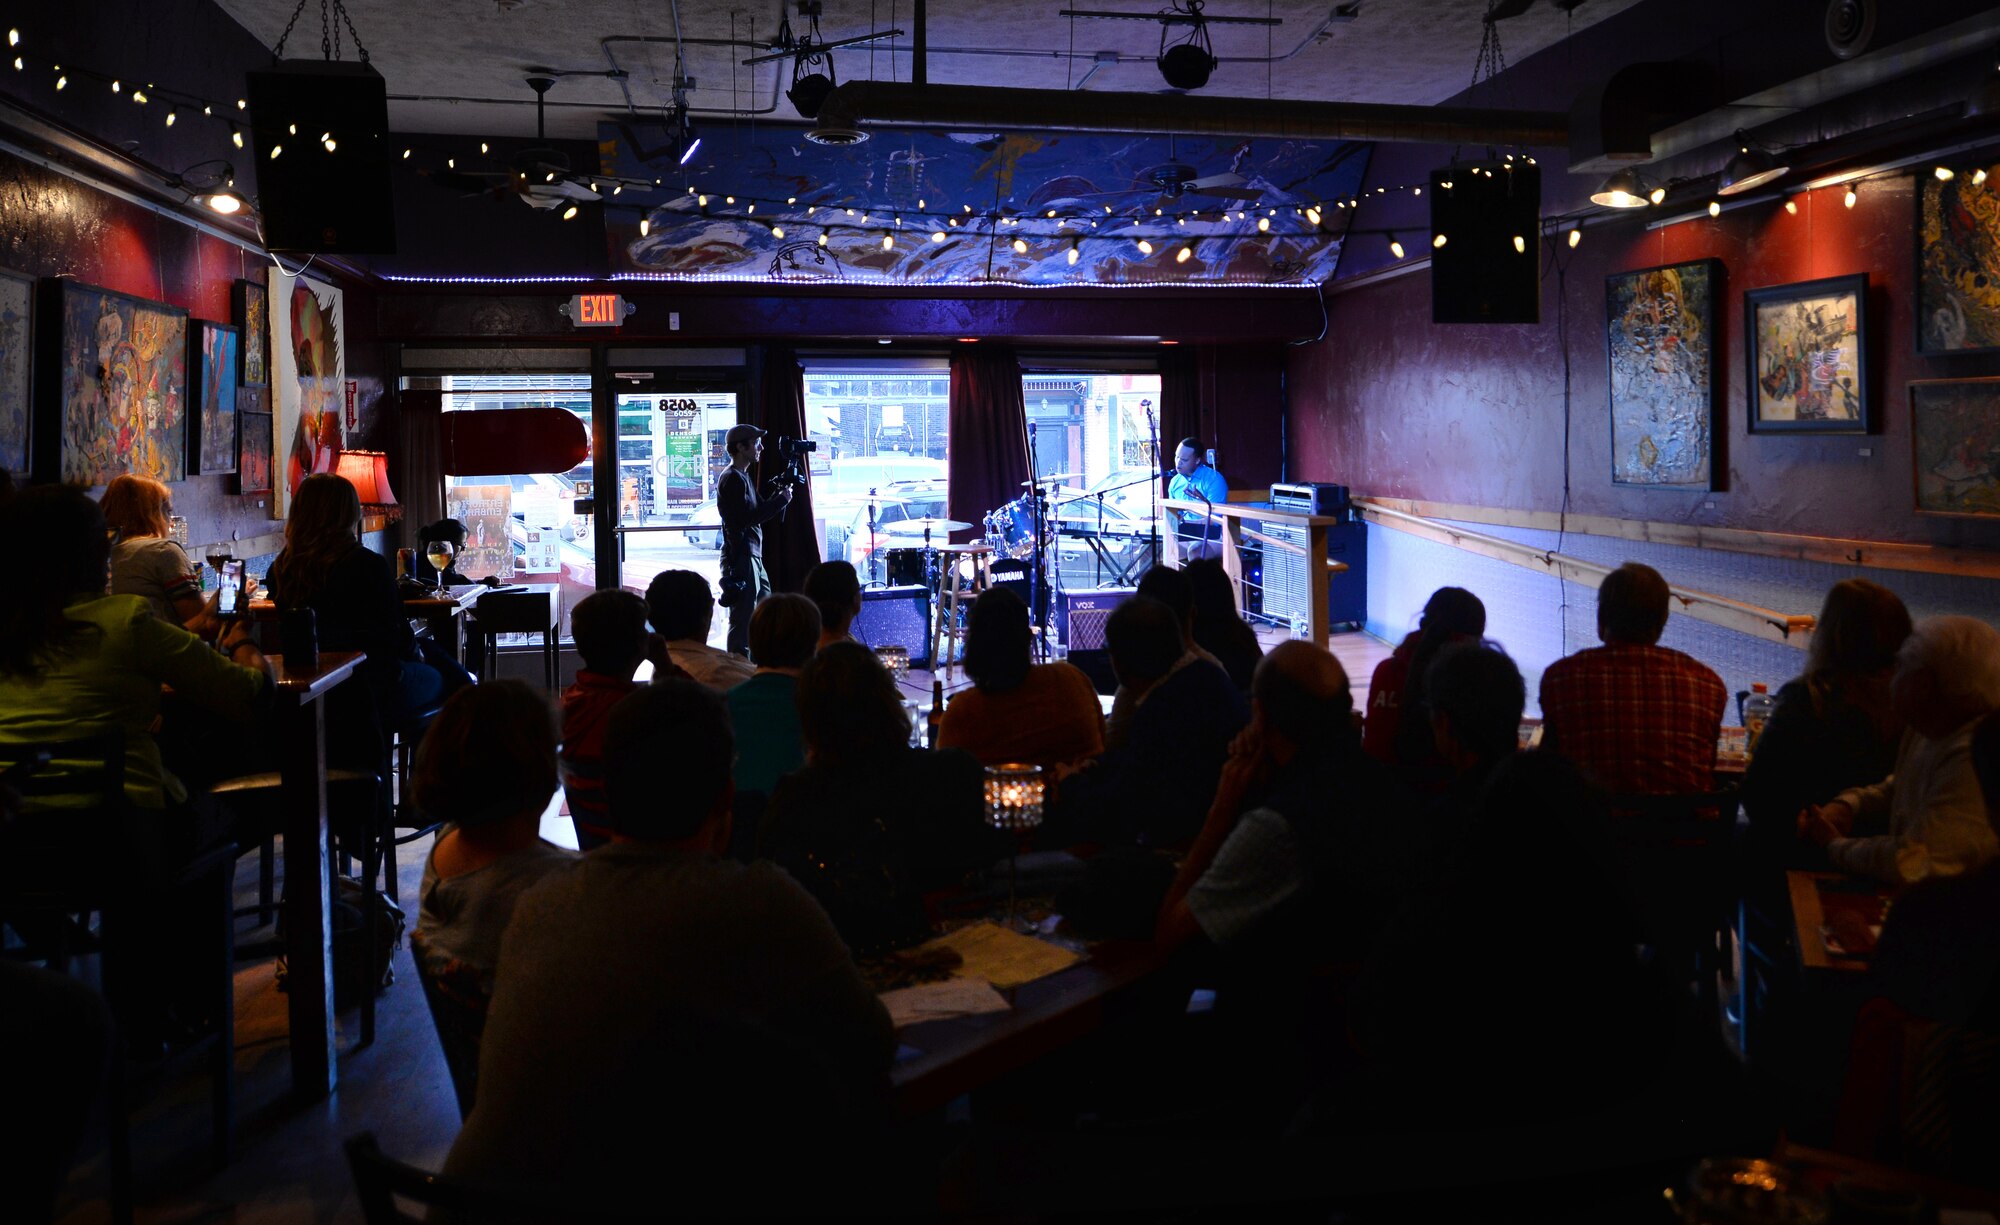 A small gathering of concert-goers and judges listen to the ten finalists of the Omaha Performing Arts Singer-Songwriter Competition at B Side Theatre, Nebraska, May 6, 2019. Airman 1st Class Mario Foreman-Powell, a vocalist with the United States Air Force Heartland of America Band, won first place and the chance to perform at the MAHA Music Festival in Omaha, Nebraska. (U.S. Air Force photo by Josh Plueger)